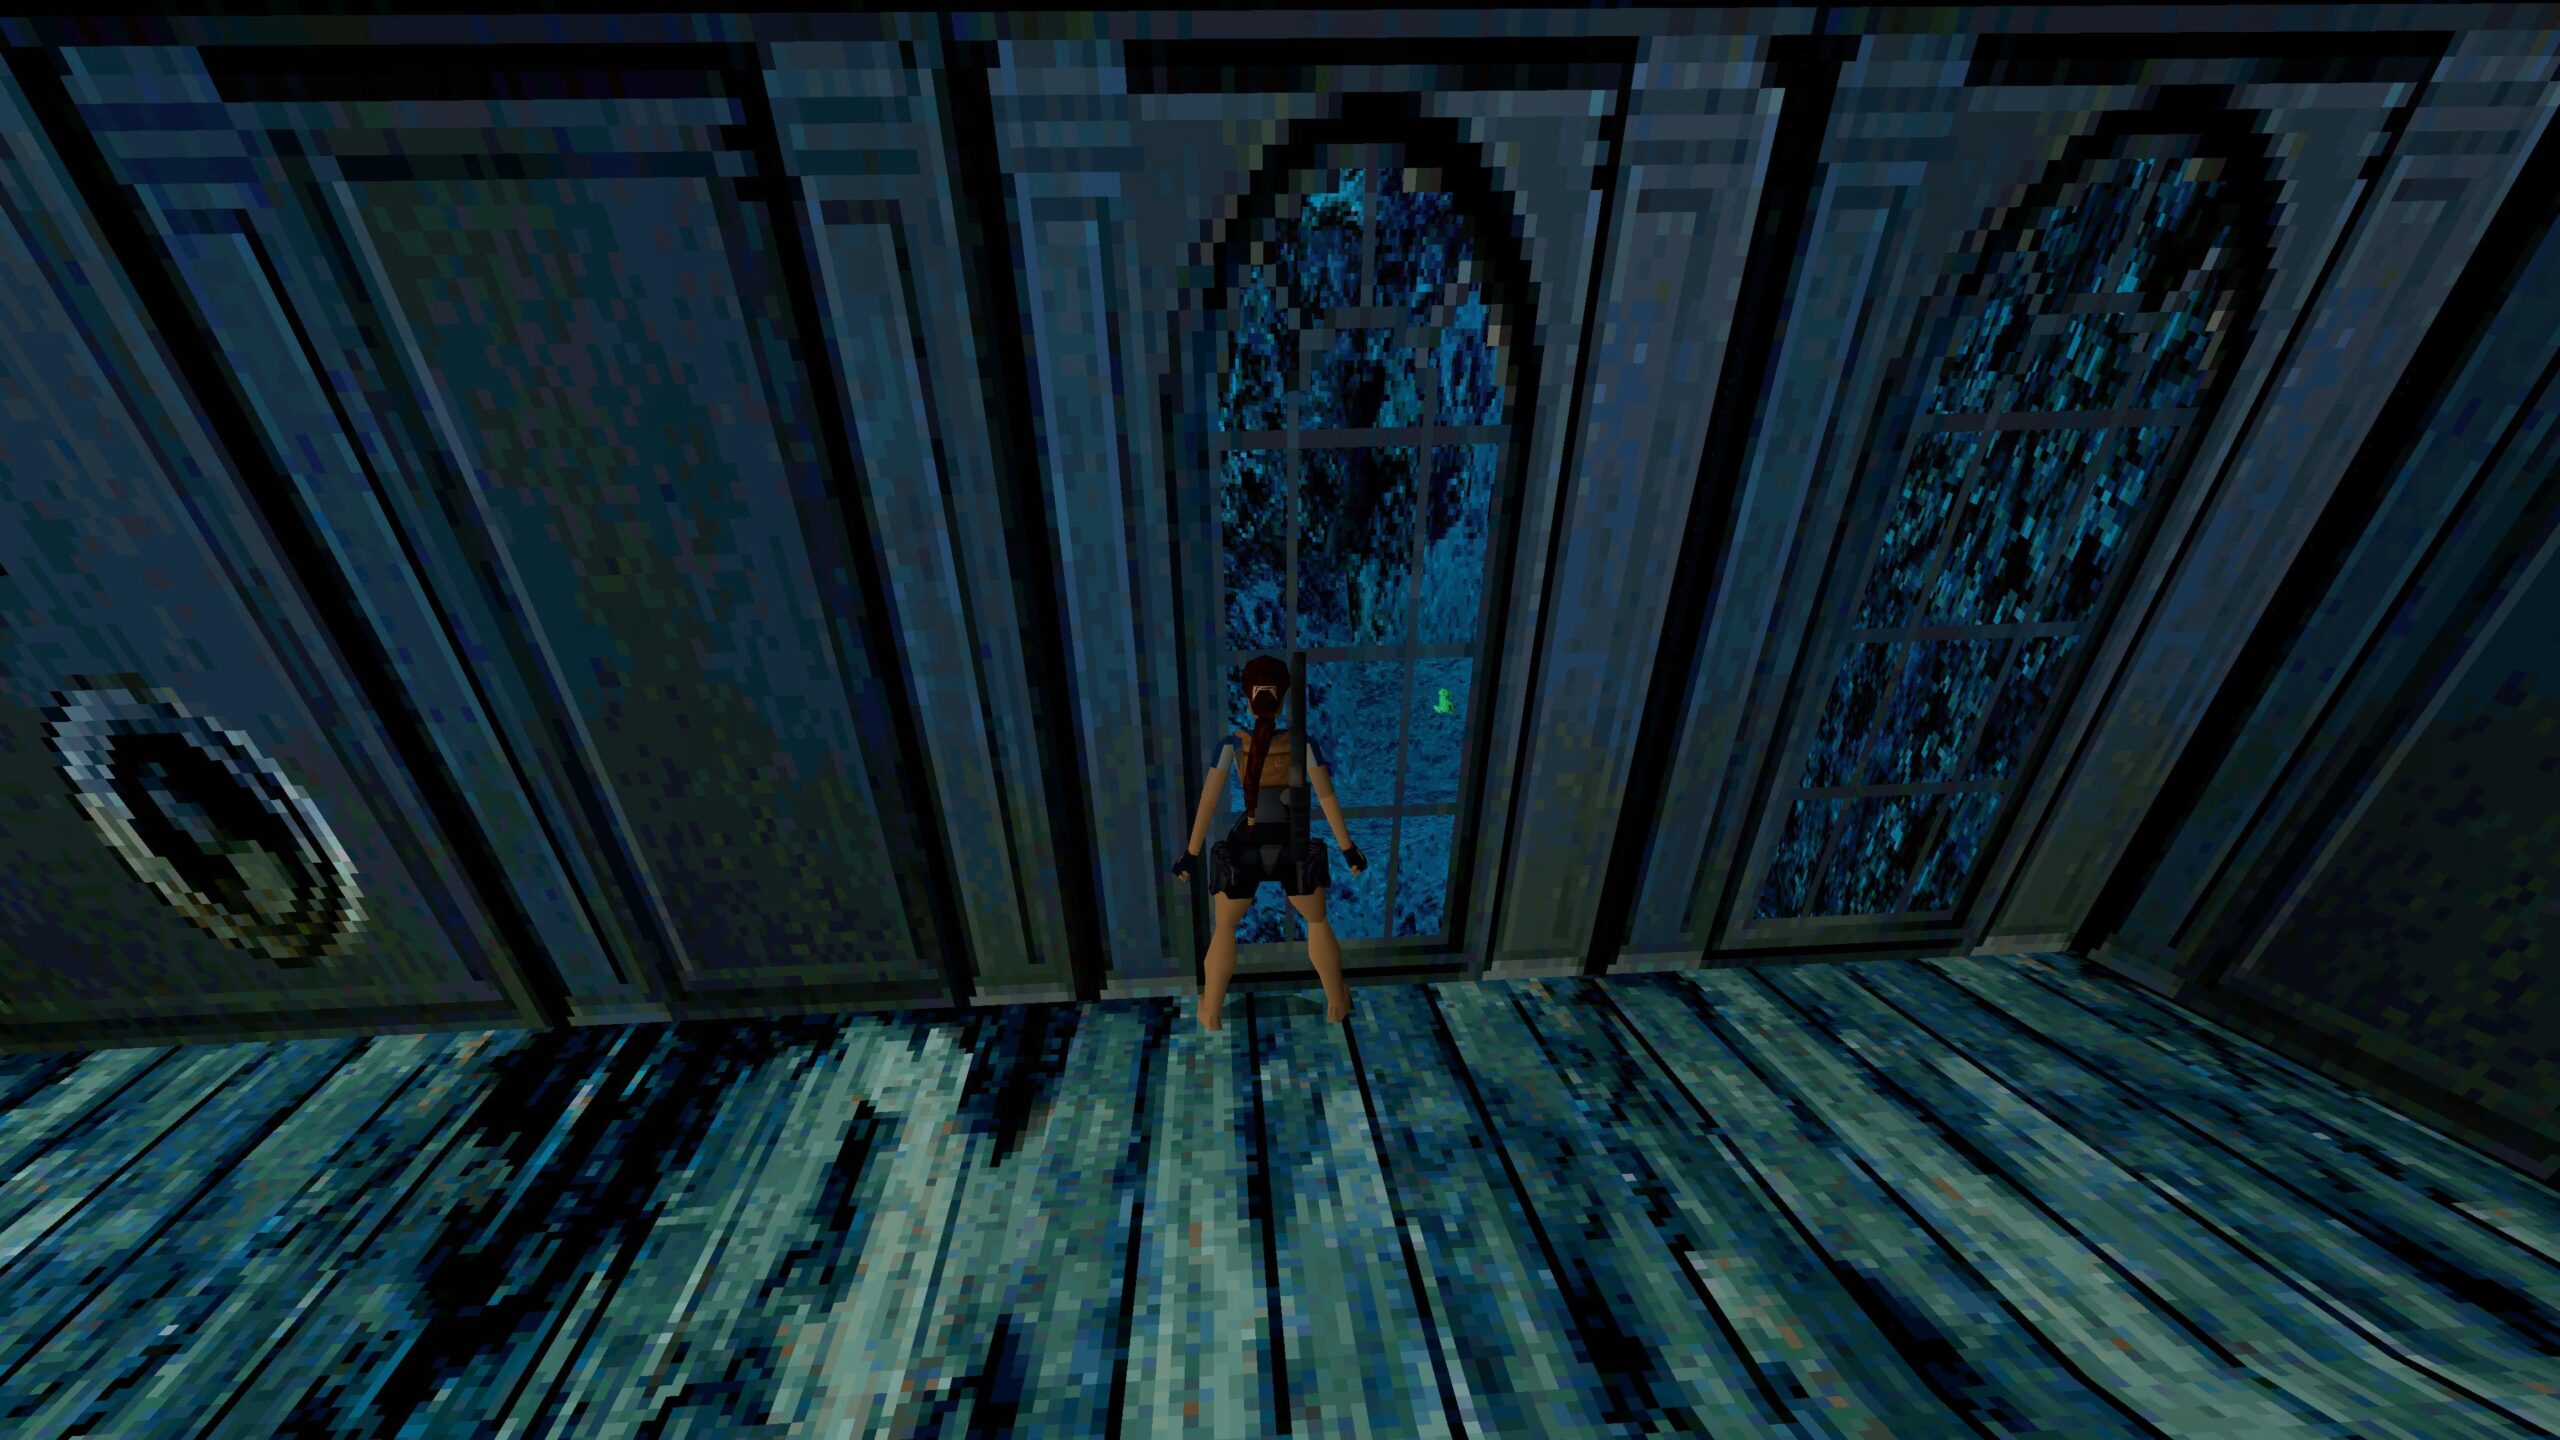 Don't worry, Lara's tank controls are still an option in Tomb Raider I-III  Remastered